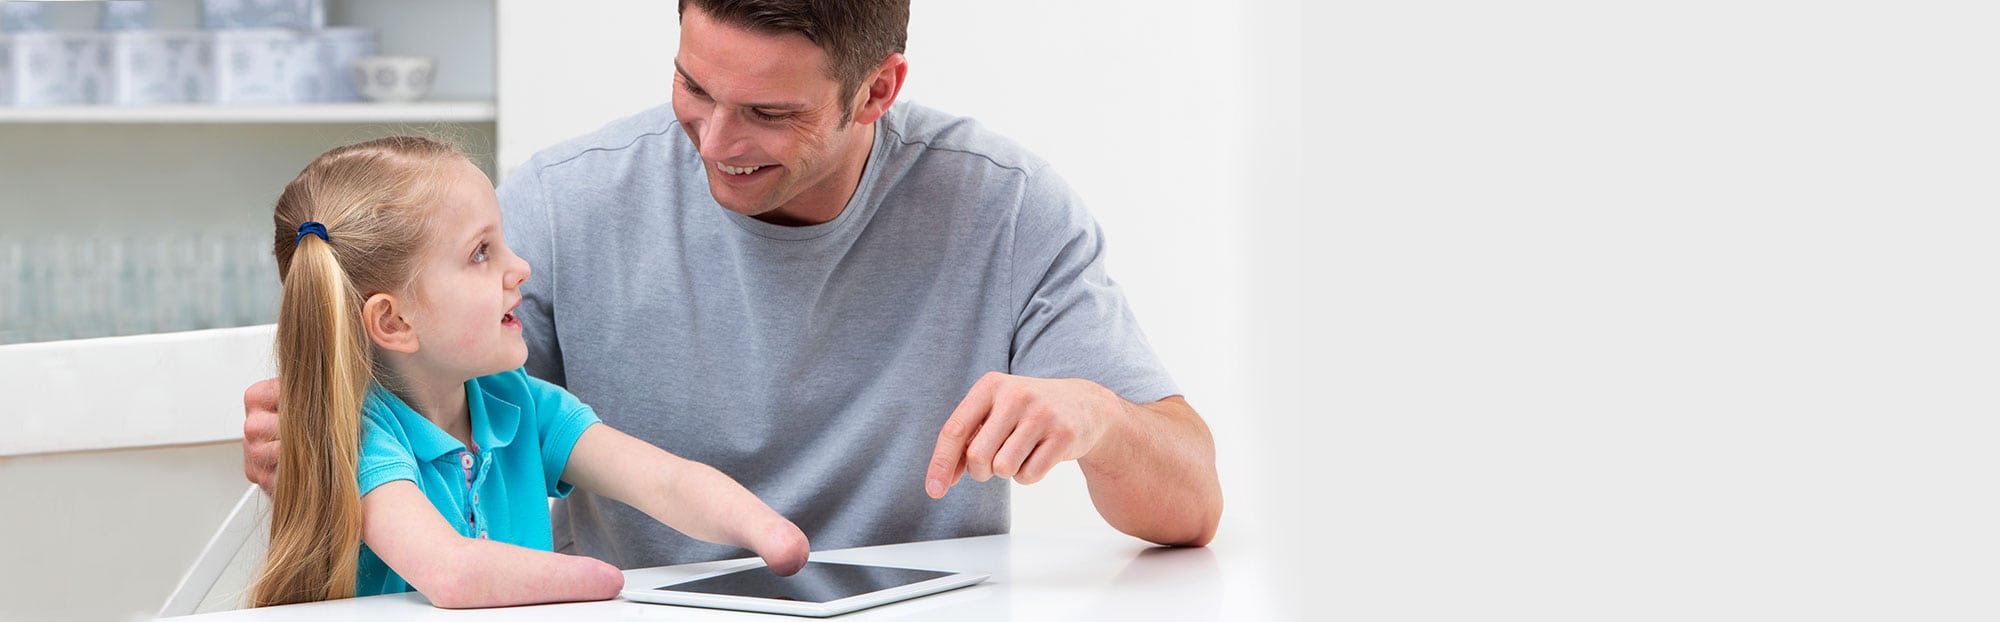 Man sits with daughter who has no hands at a table looking at a tablet